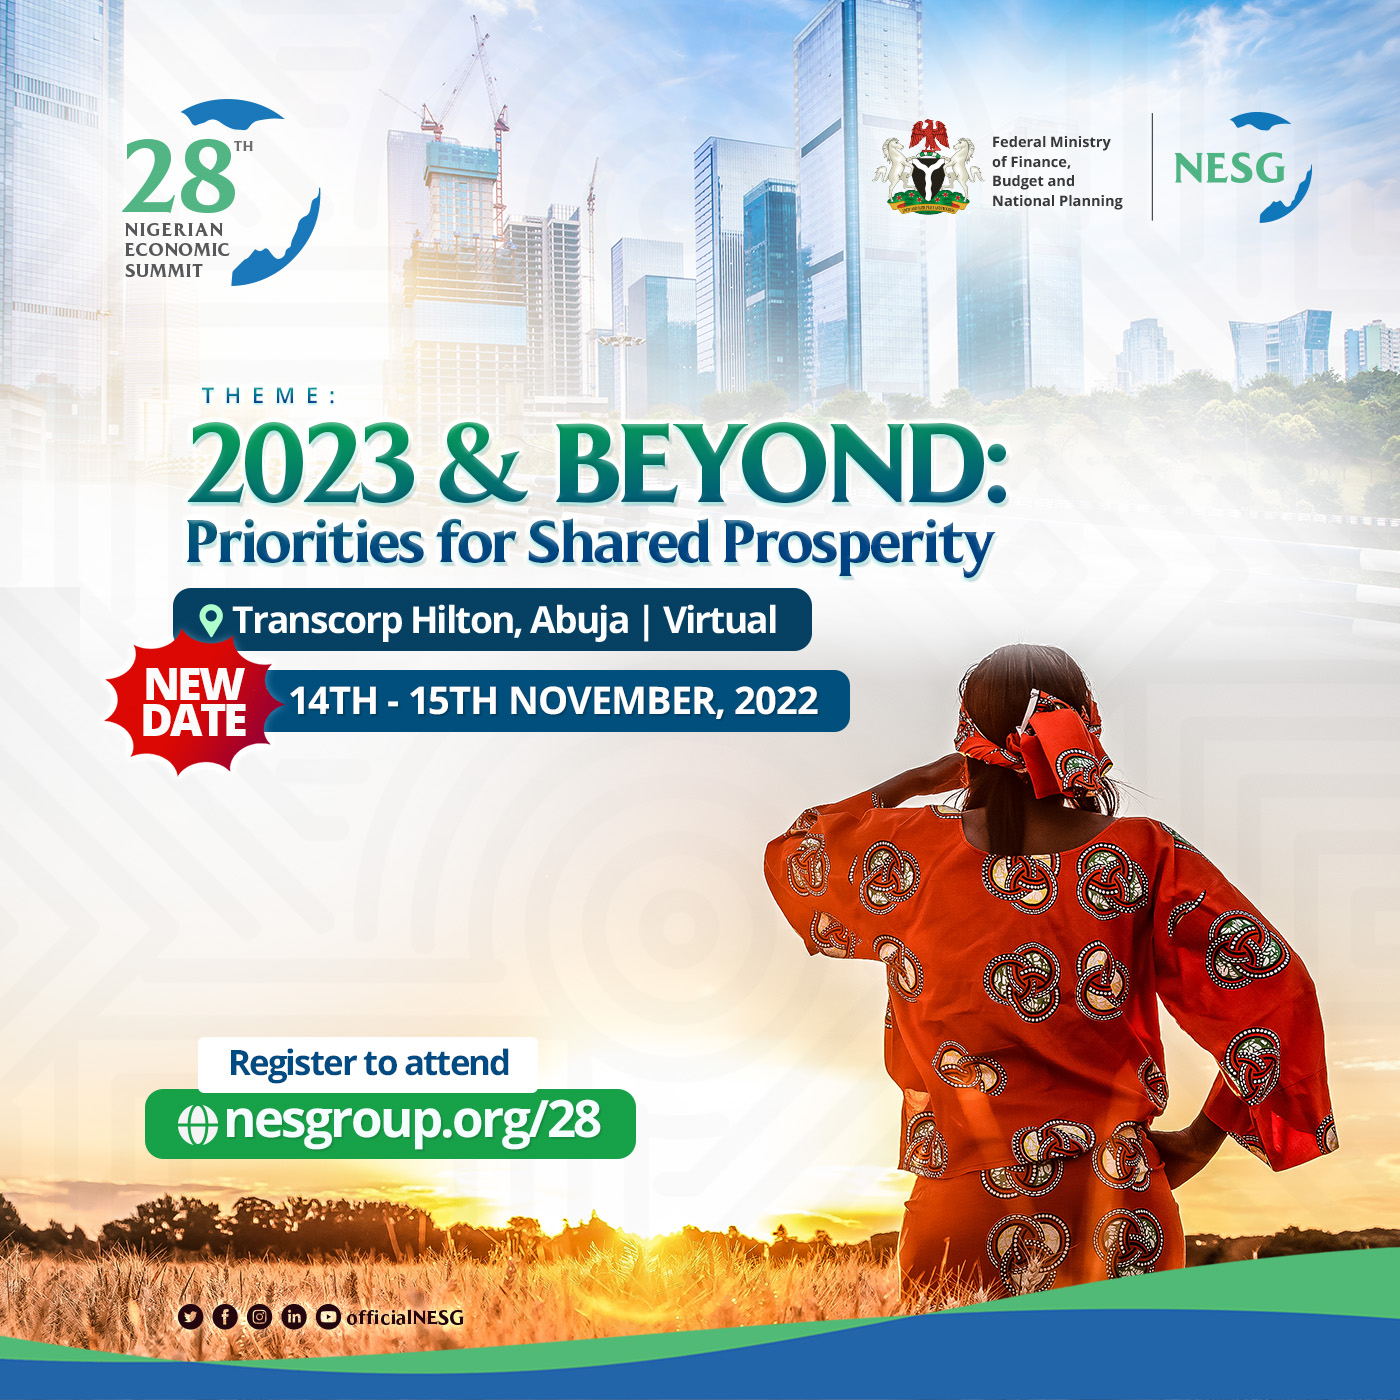 The 28th Nigerian Economic Summit Rescheduled to 14h and 15th November 2022,The Nigerian Economic Summit Group, The NESG, think-tank, think, tank, nigeria, policy, nesg, africa, number one think in africa, best think in nigeria, the best think tank in africa, top 10 think tanks in nigeria, think tank nigeria, economy, business, PPD, public, private, dialogue, Nigeria, Nigeria PPD, NIGERIA, PPD, The Nigerian Economic Summit Group